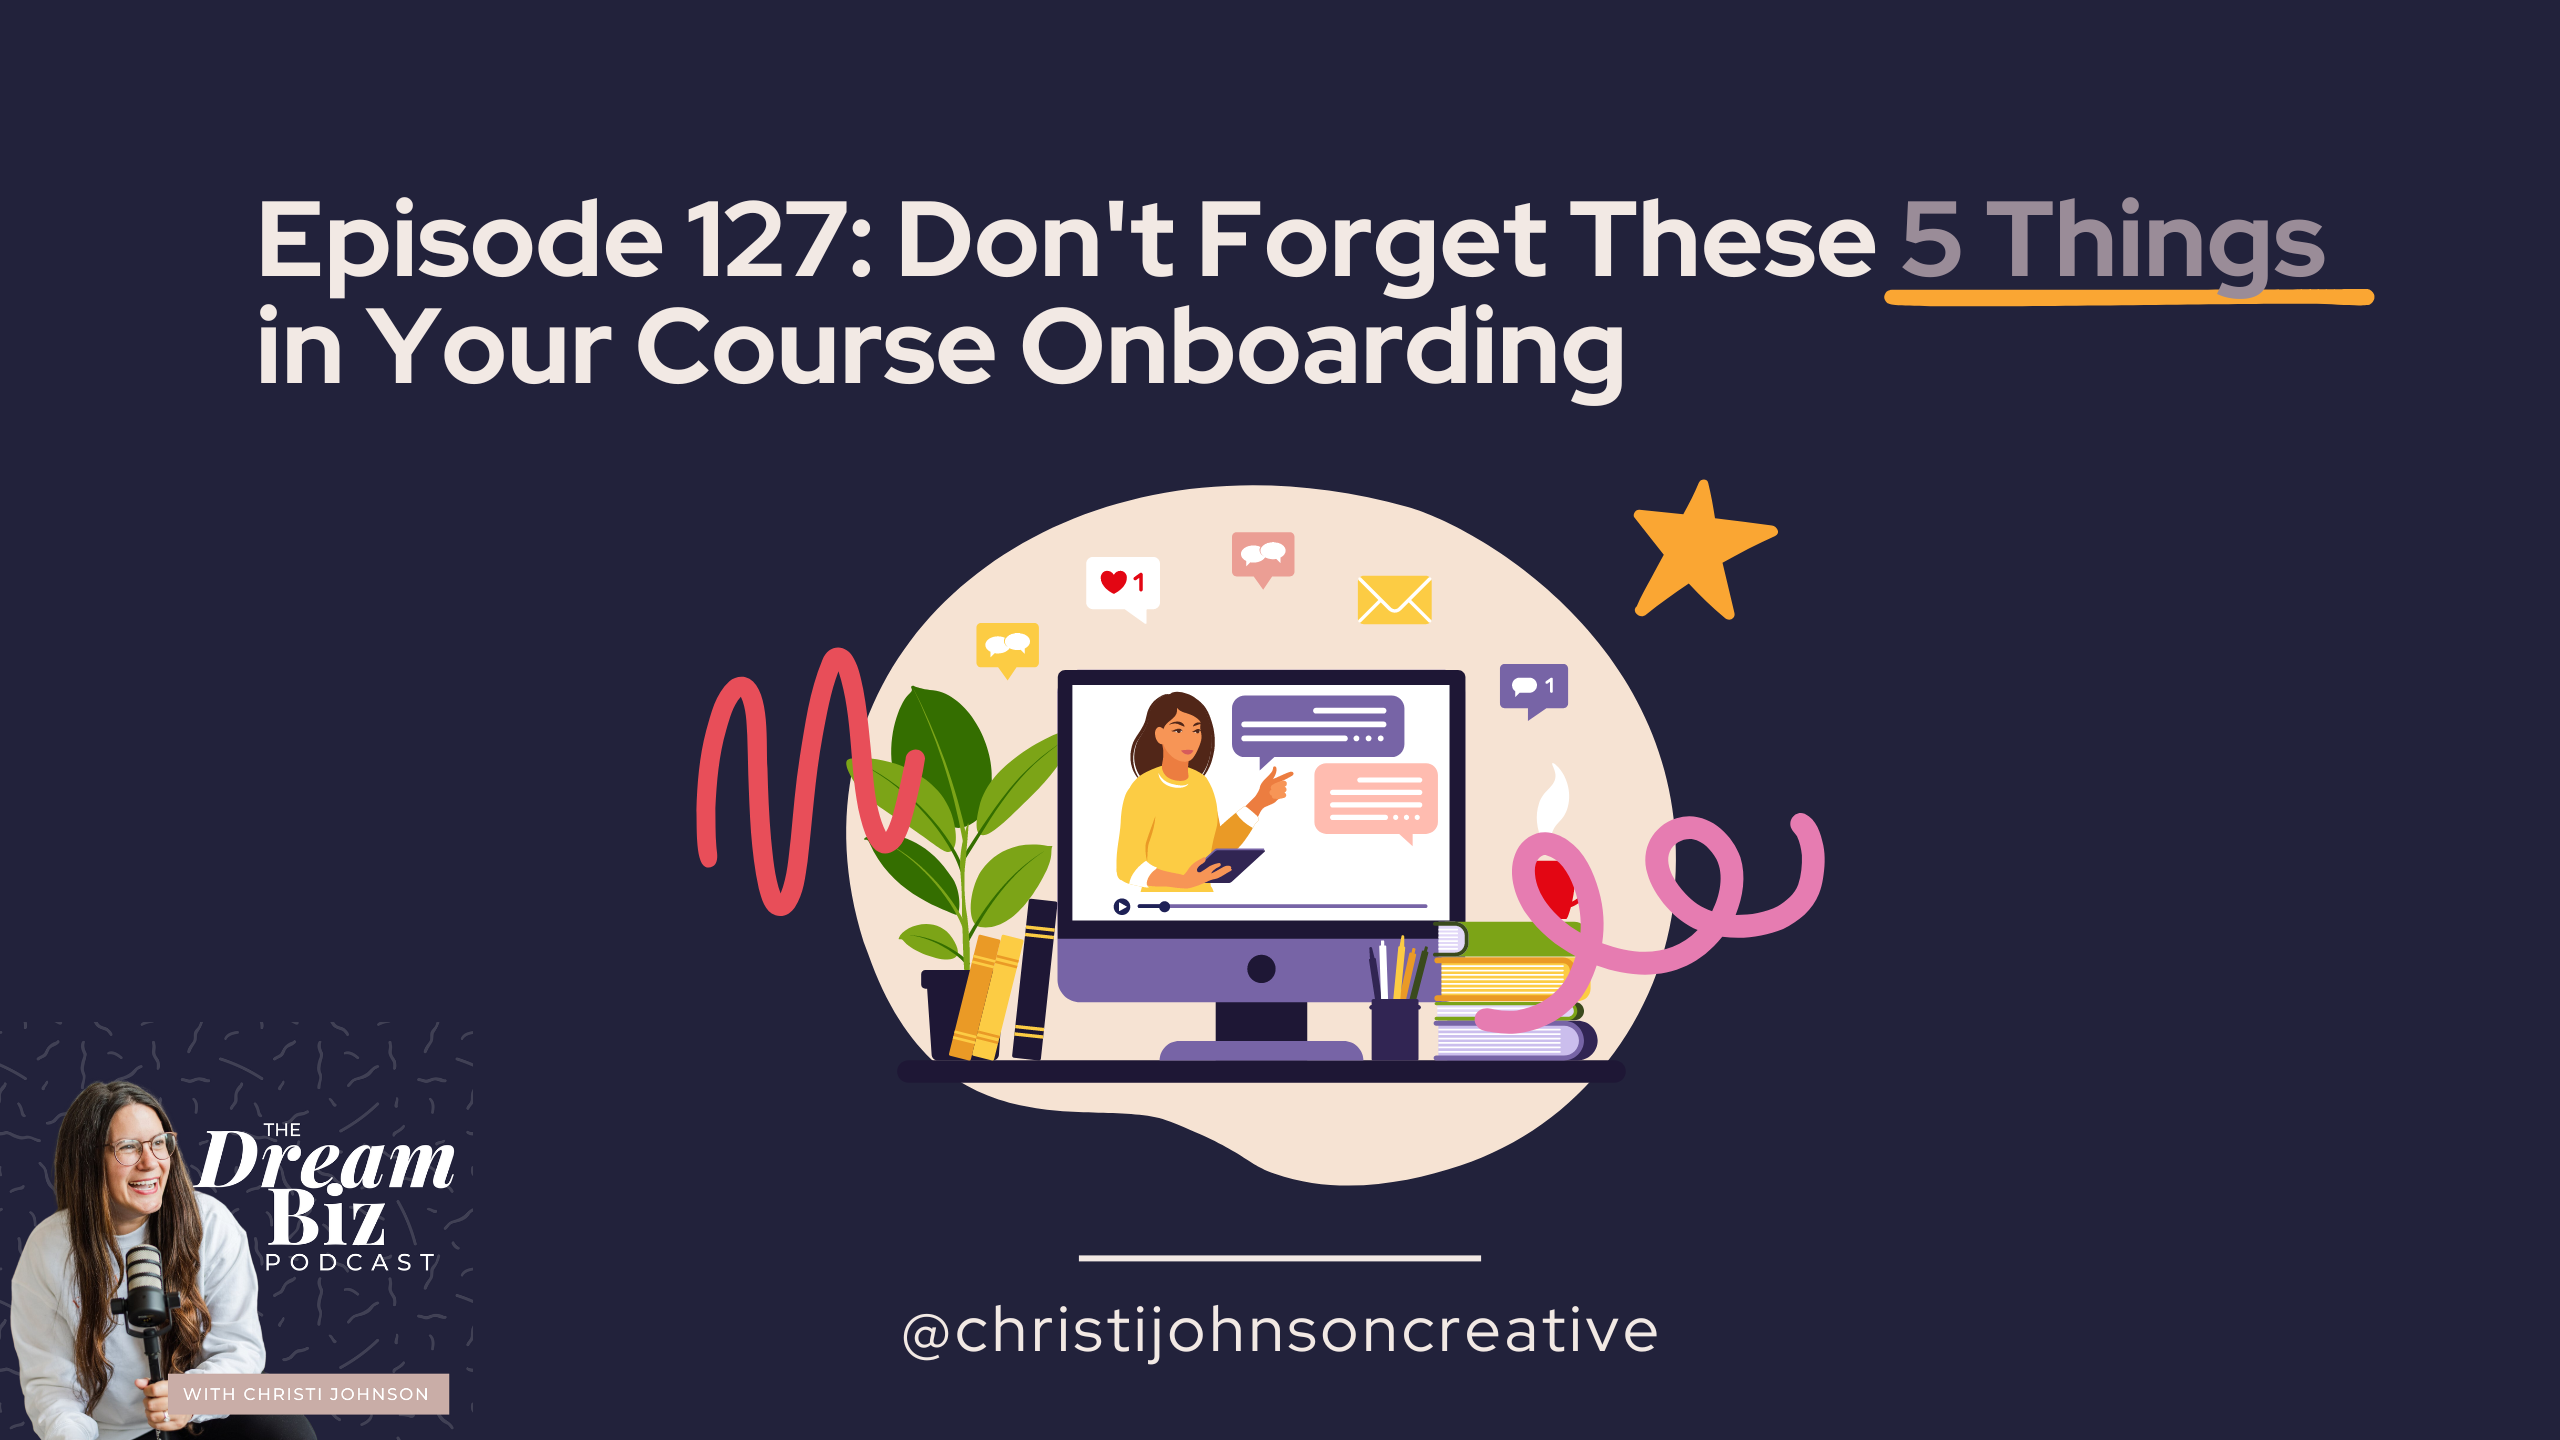 ID: Episode 127: Don't Forget These 5 Things in Your Course Onboarding.